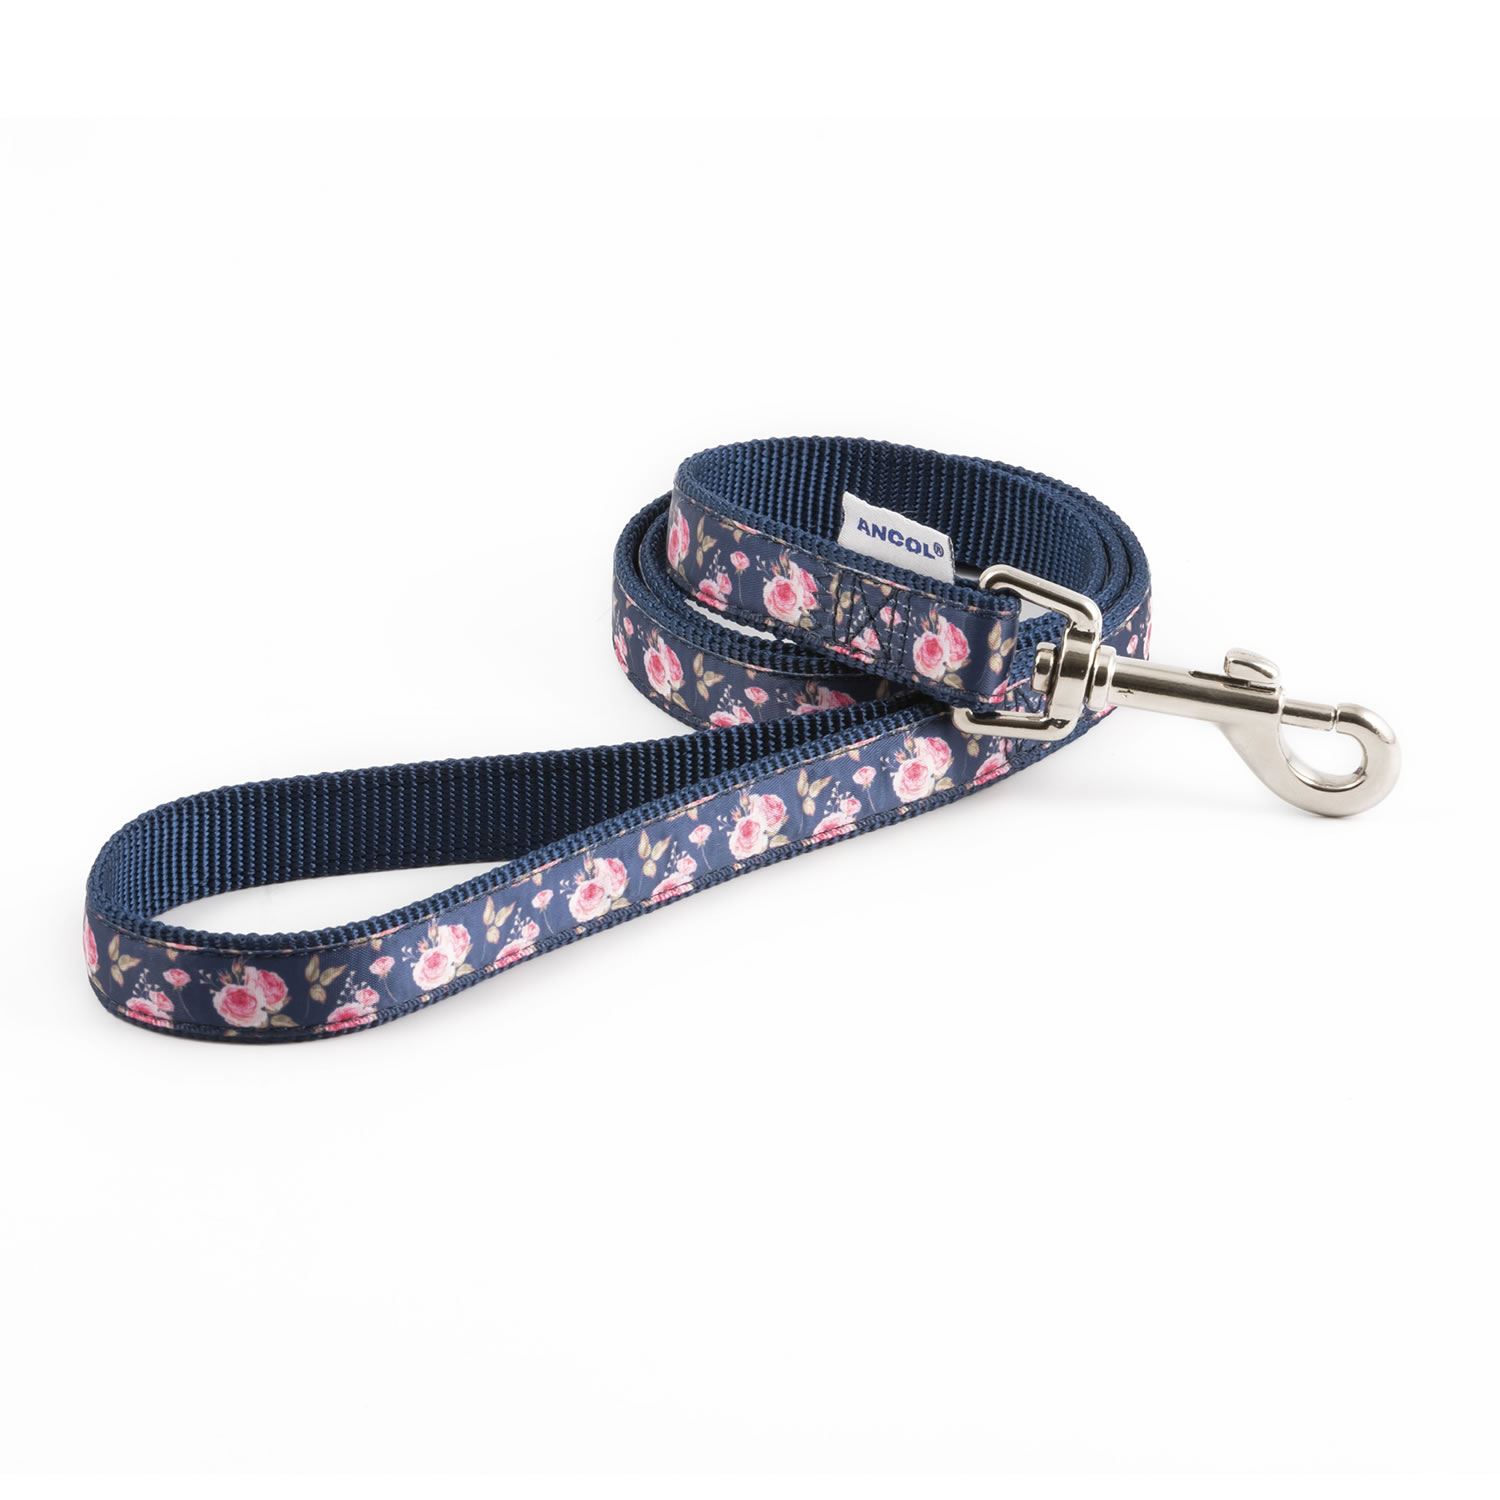 ANCOL PATTERNED COLLECTION LEAD NAVY/ROSE